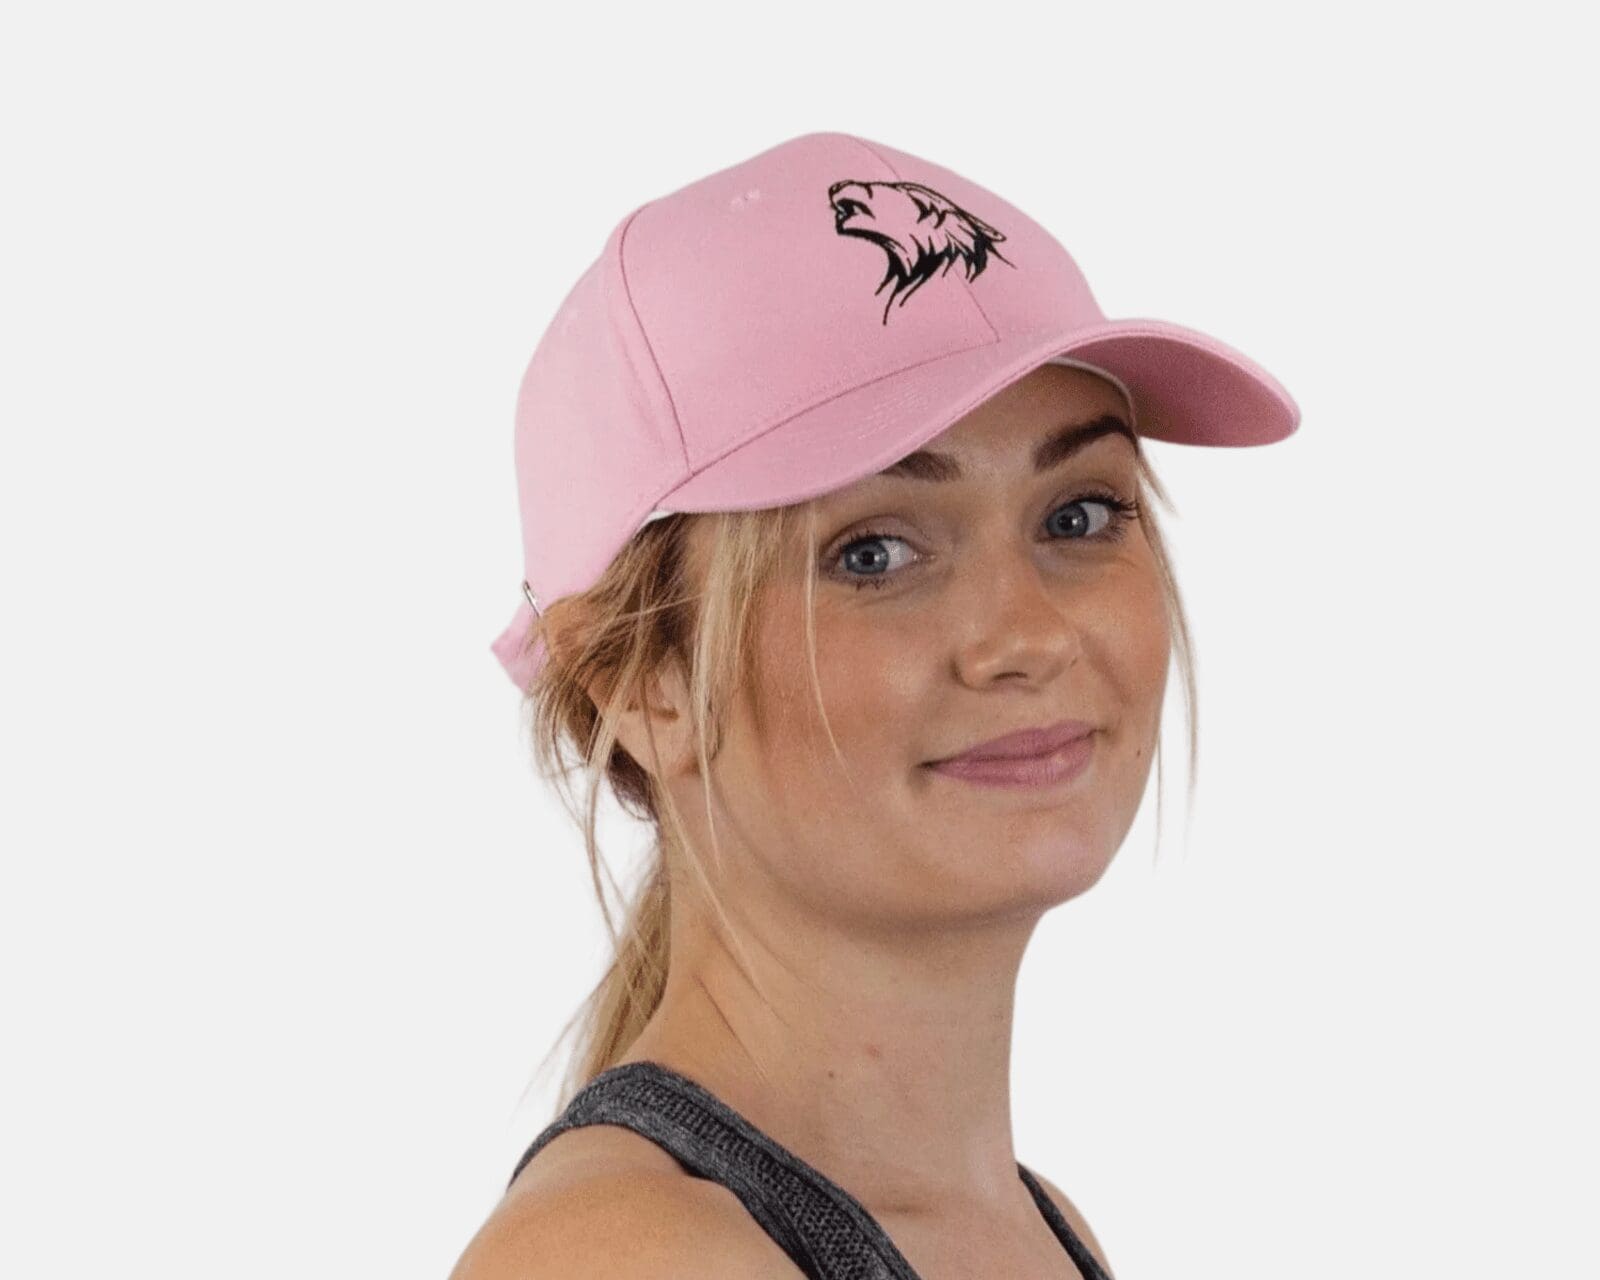 A woman wearing a pink hat with an animal on it.